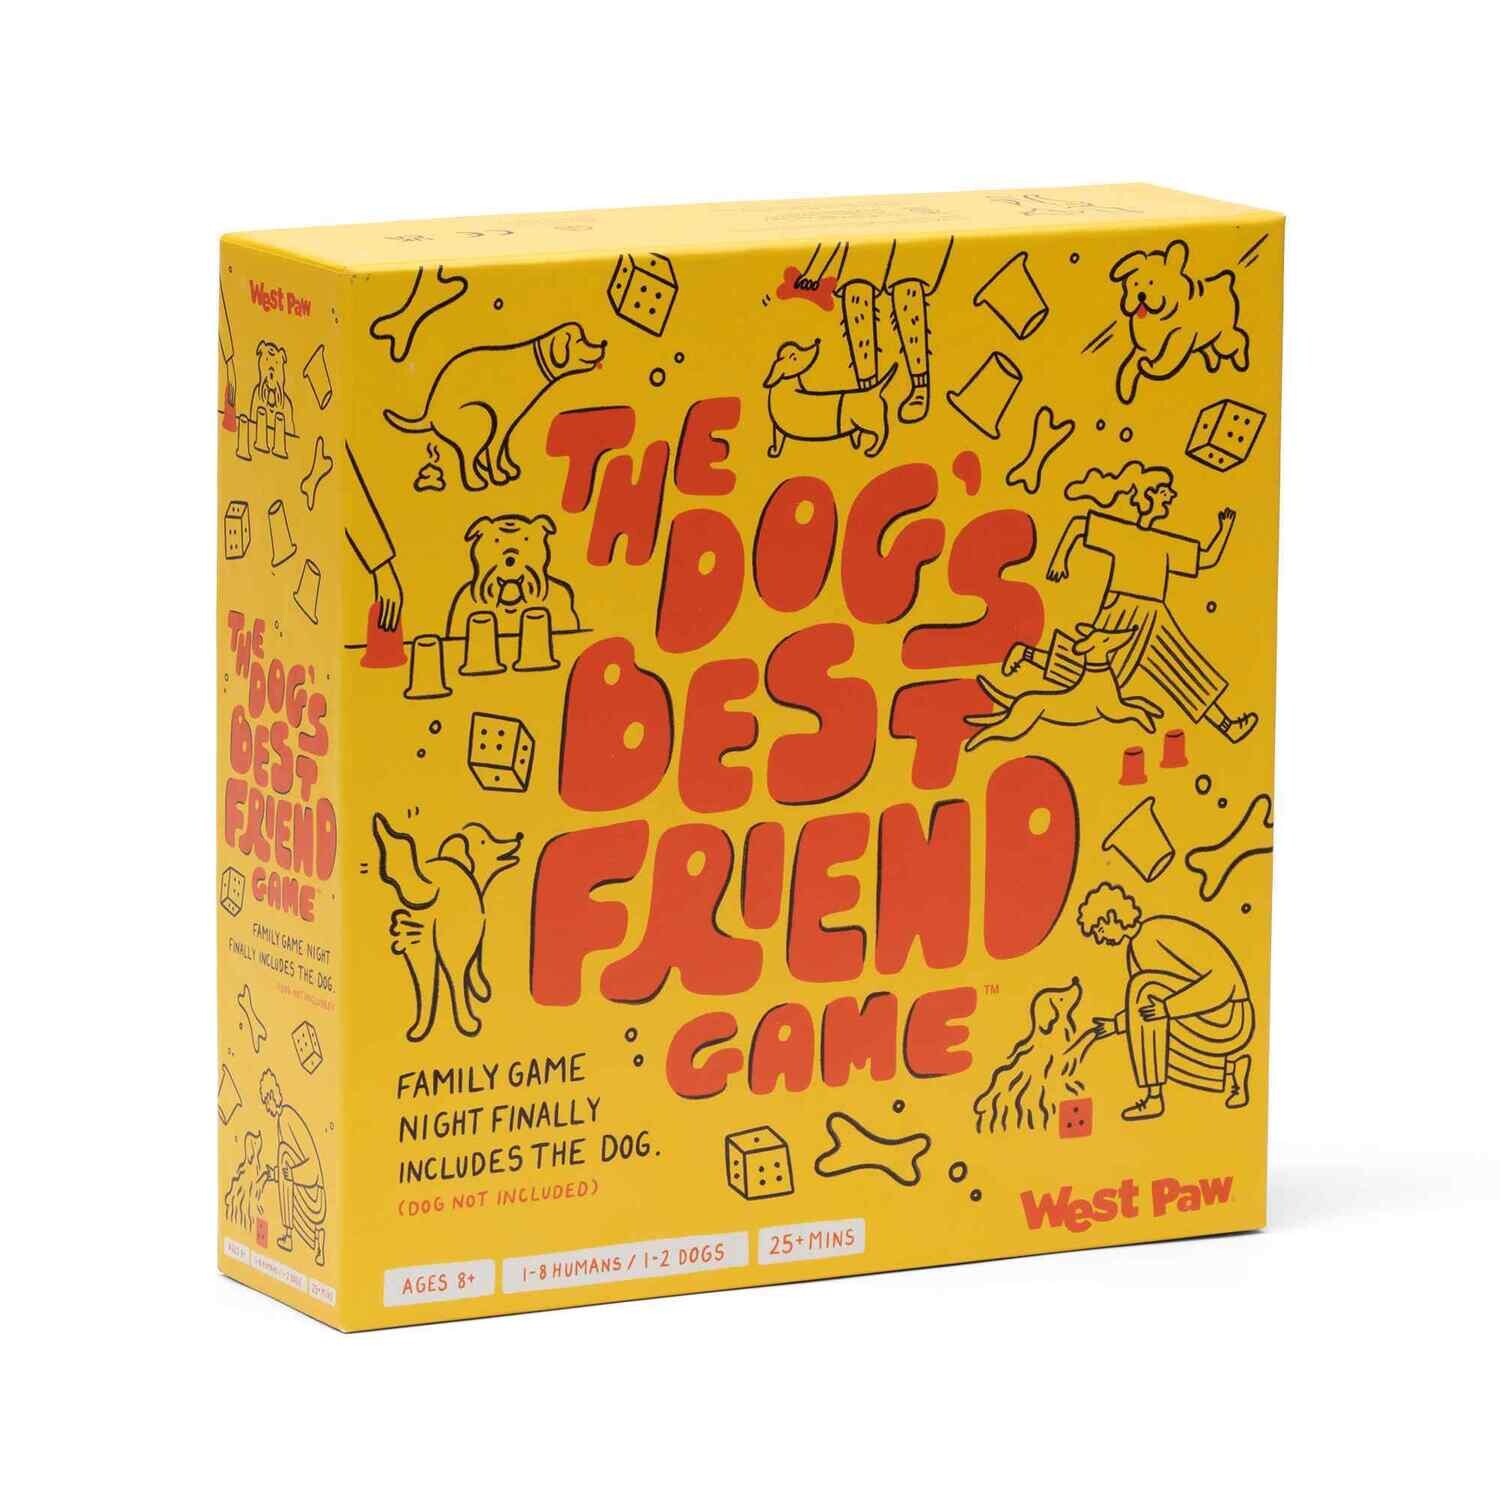 West Paw - The Dog's Best Friend Game